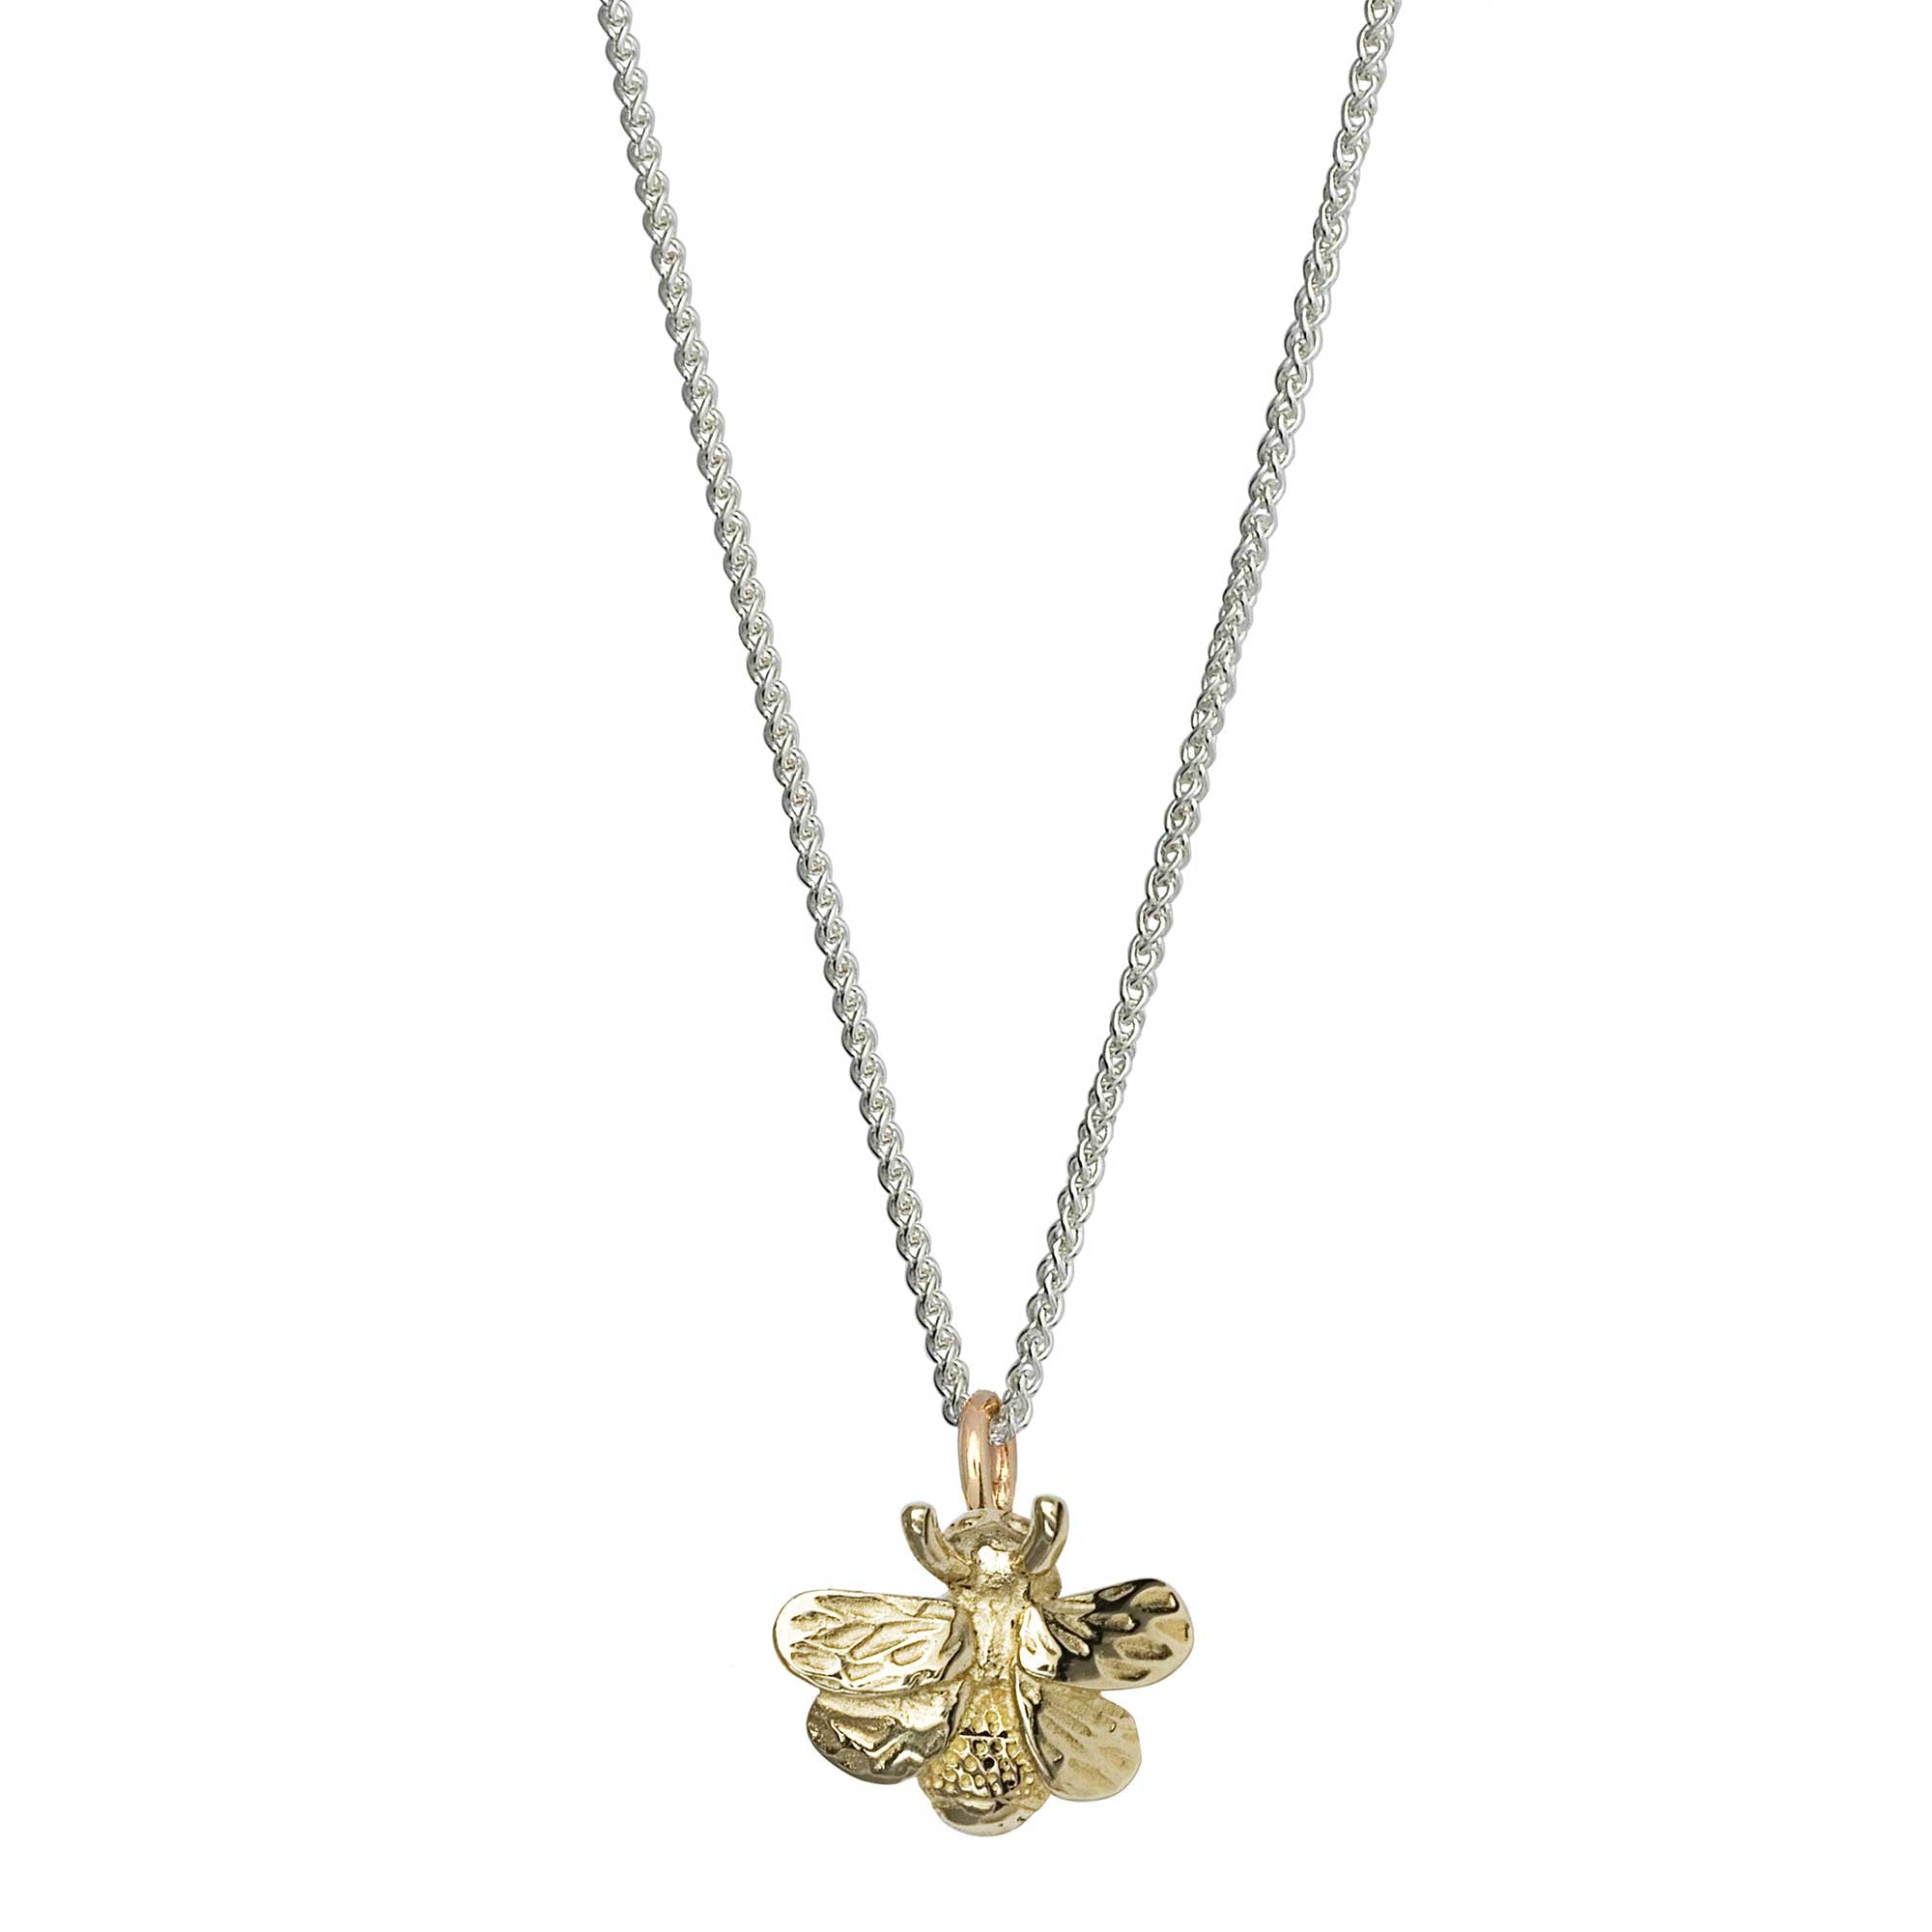 Solid gold and silver bumble bee necklace recycled gold designer Scarlett Jewellery